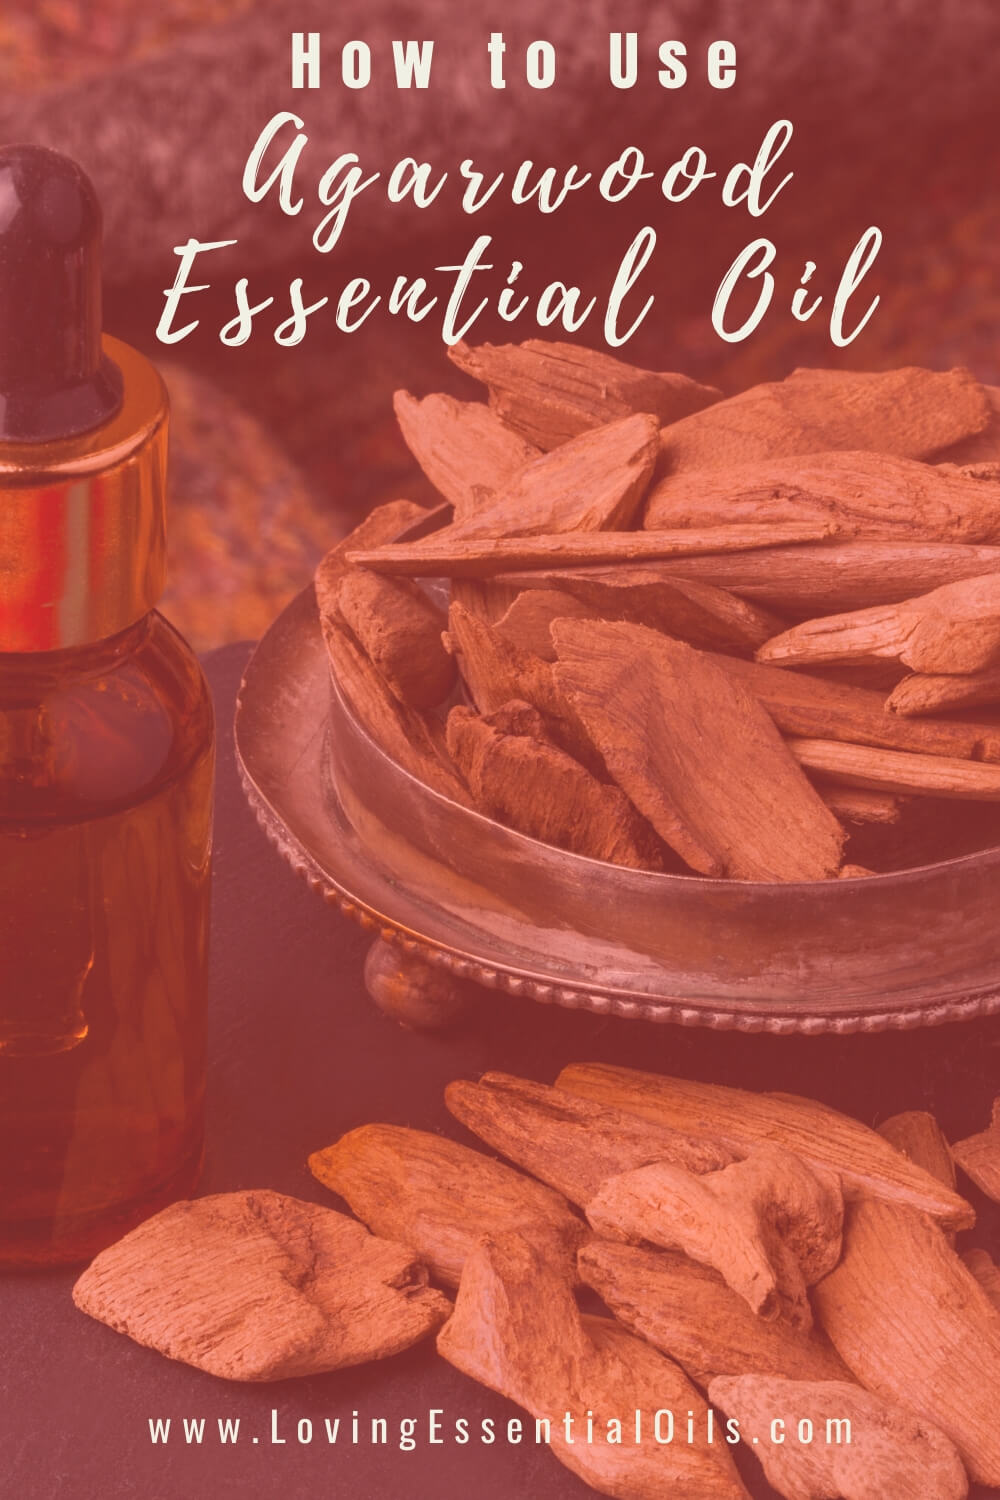 How to Use Agarwood Essential Oil for Health and Wellness with DIY Recipes and Benefits by Loving Essential Oils